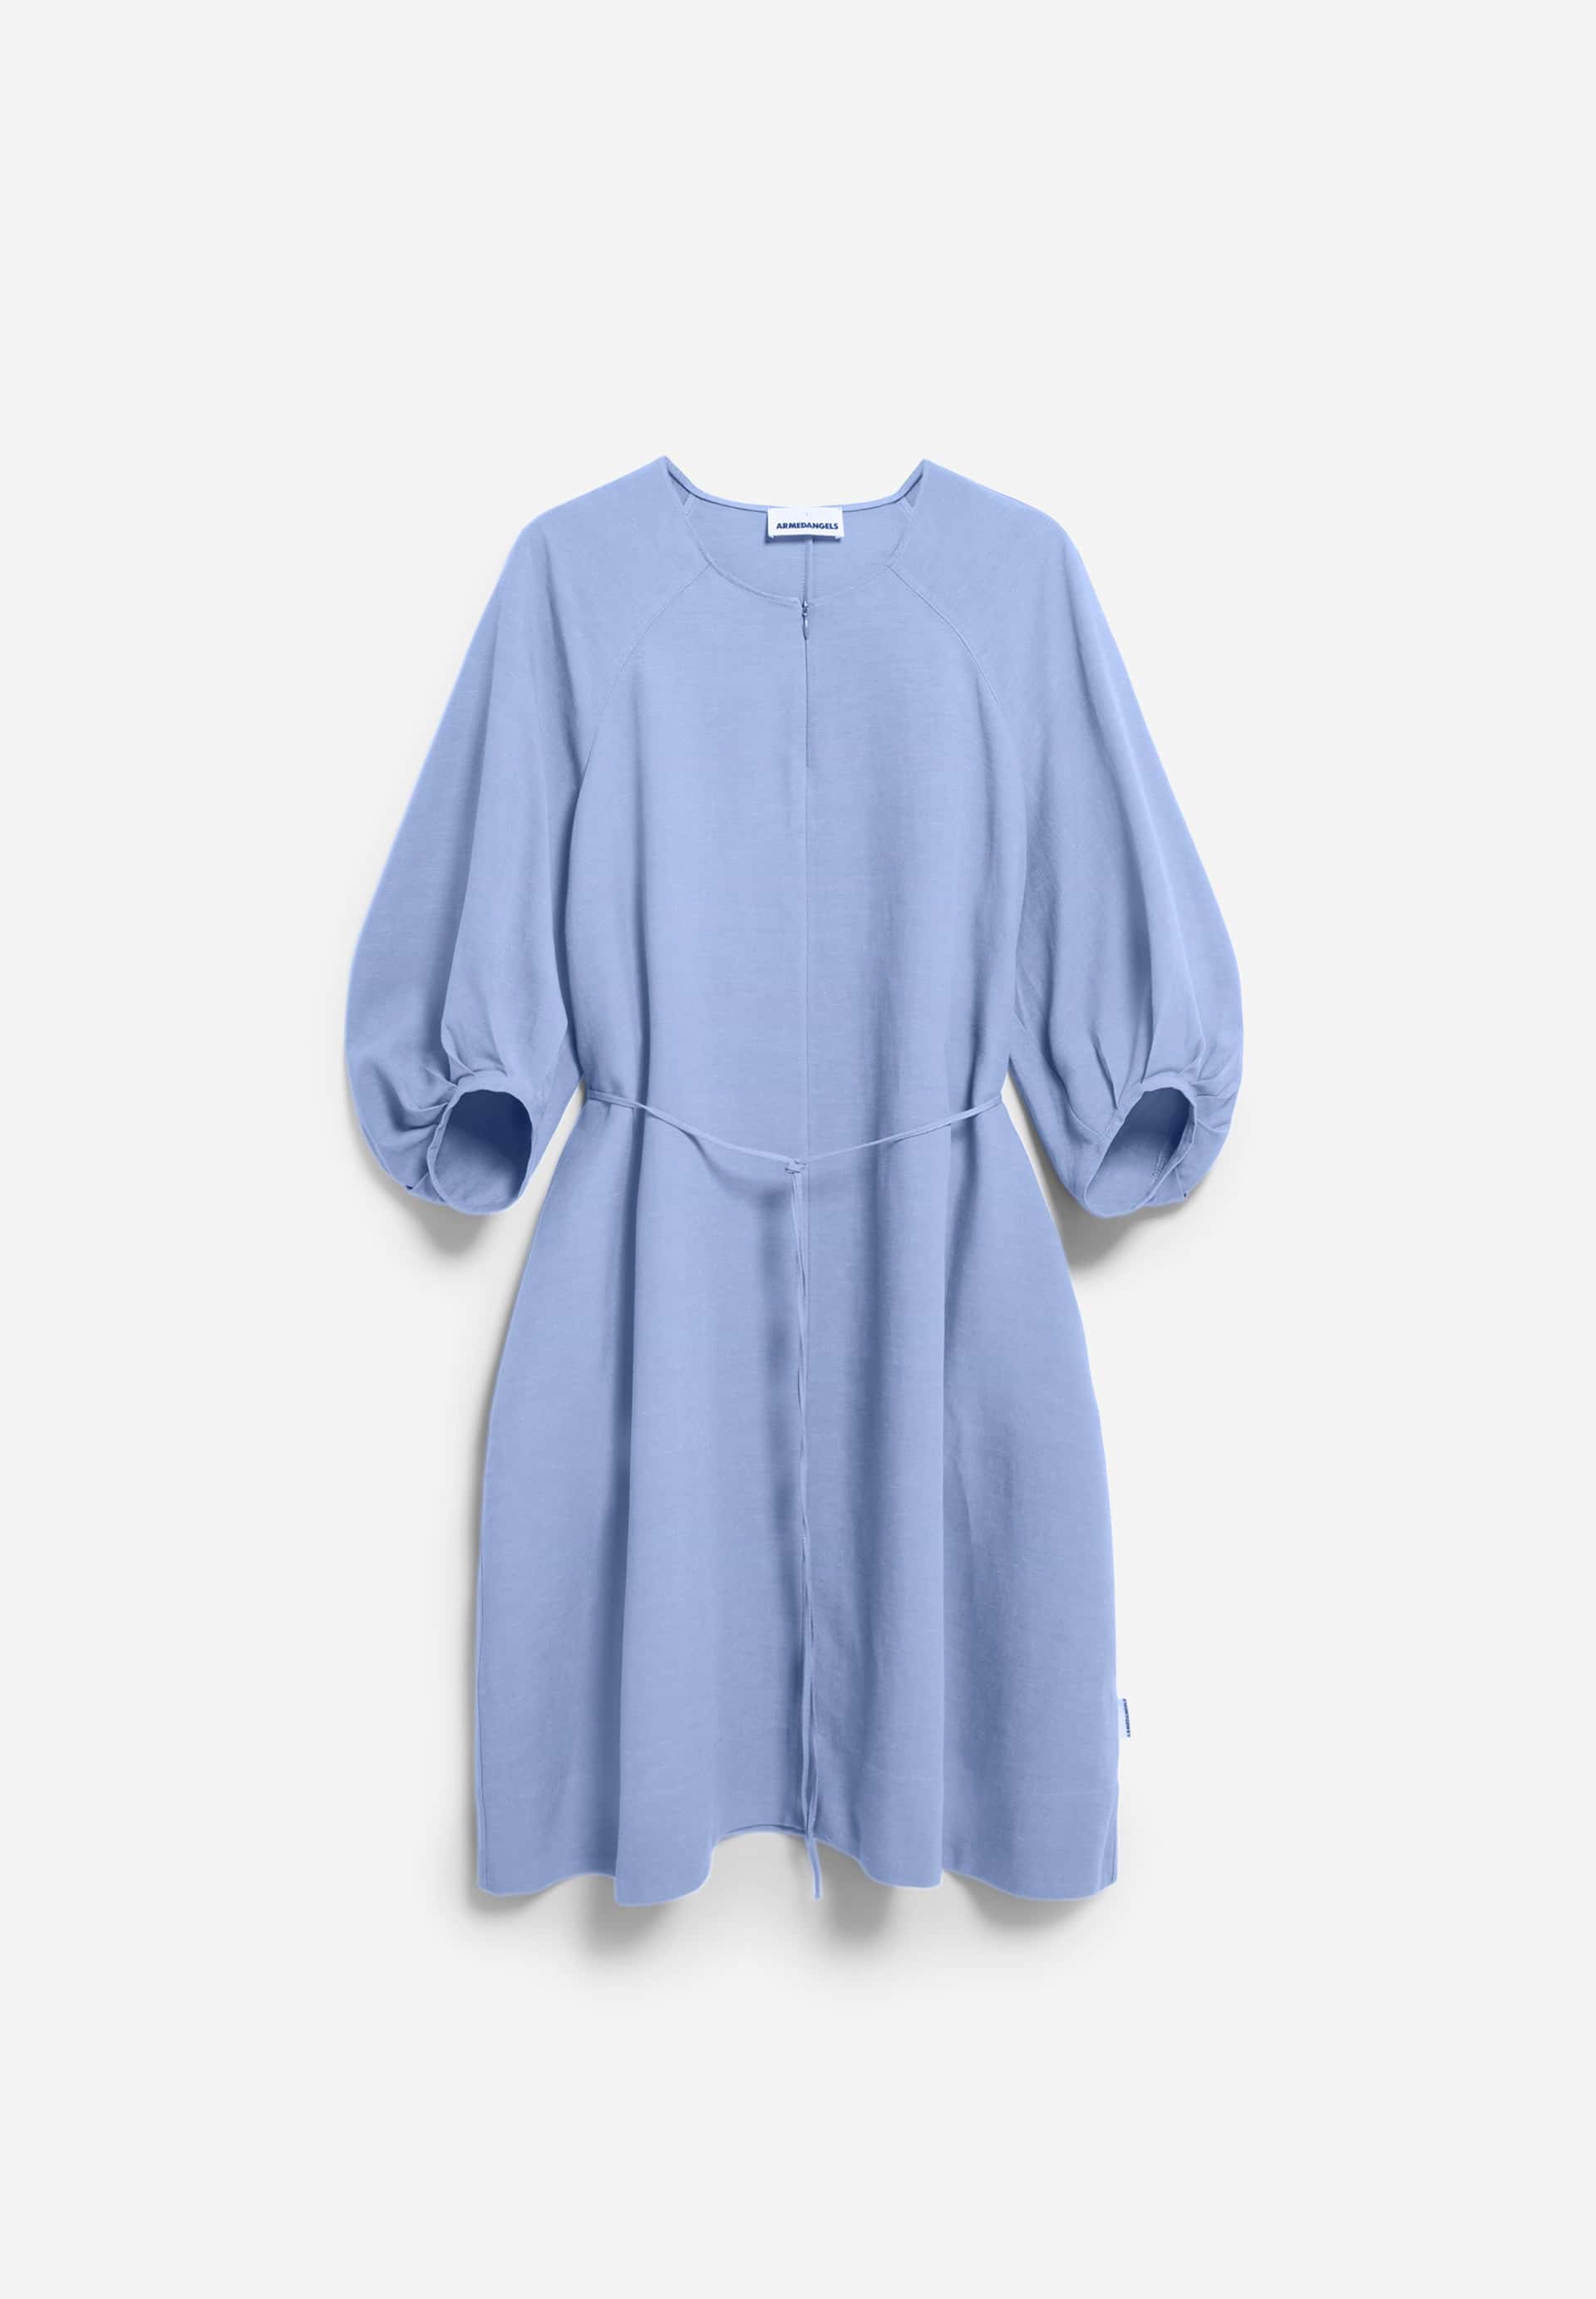 ATESSAA LINO Woven Dress Loose Fit made of Linen-Mix